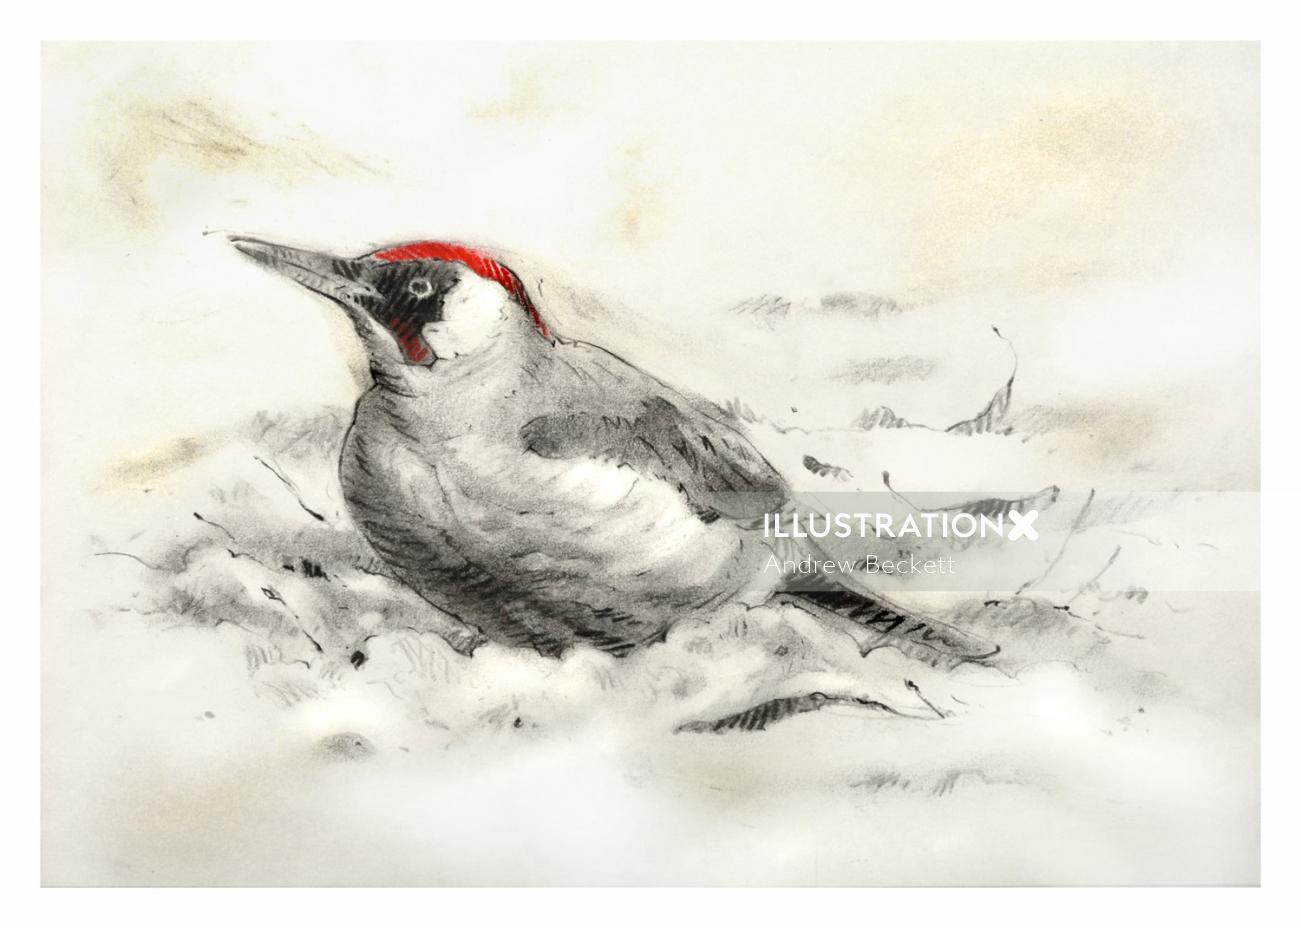 Green Woodpecker Christmas card - An illustration by Andrew Beckett